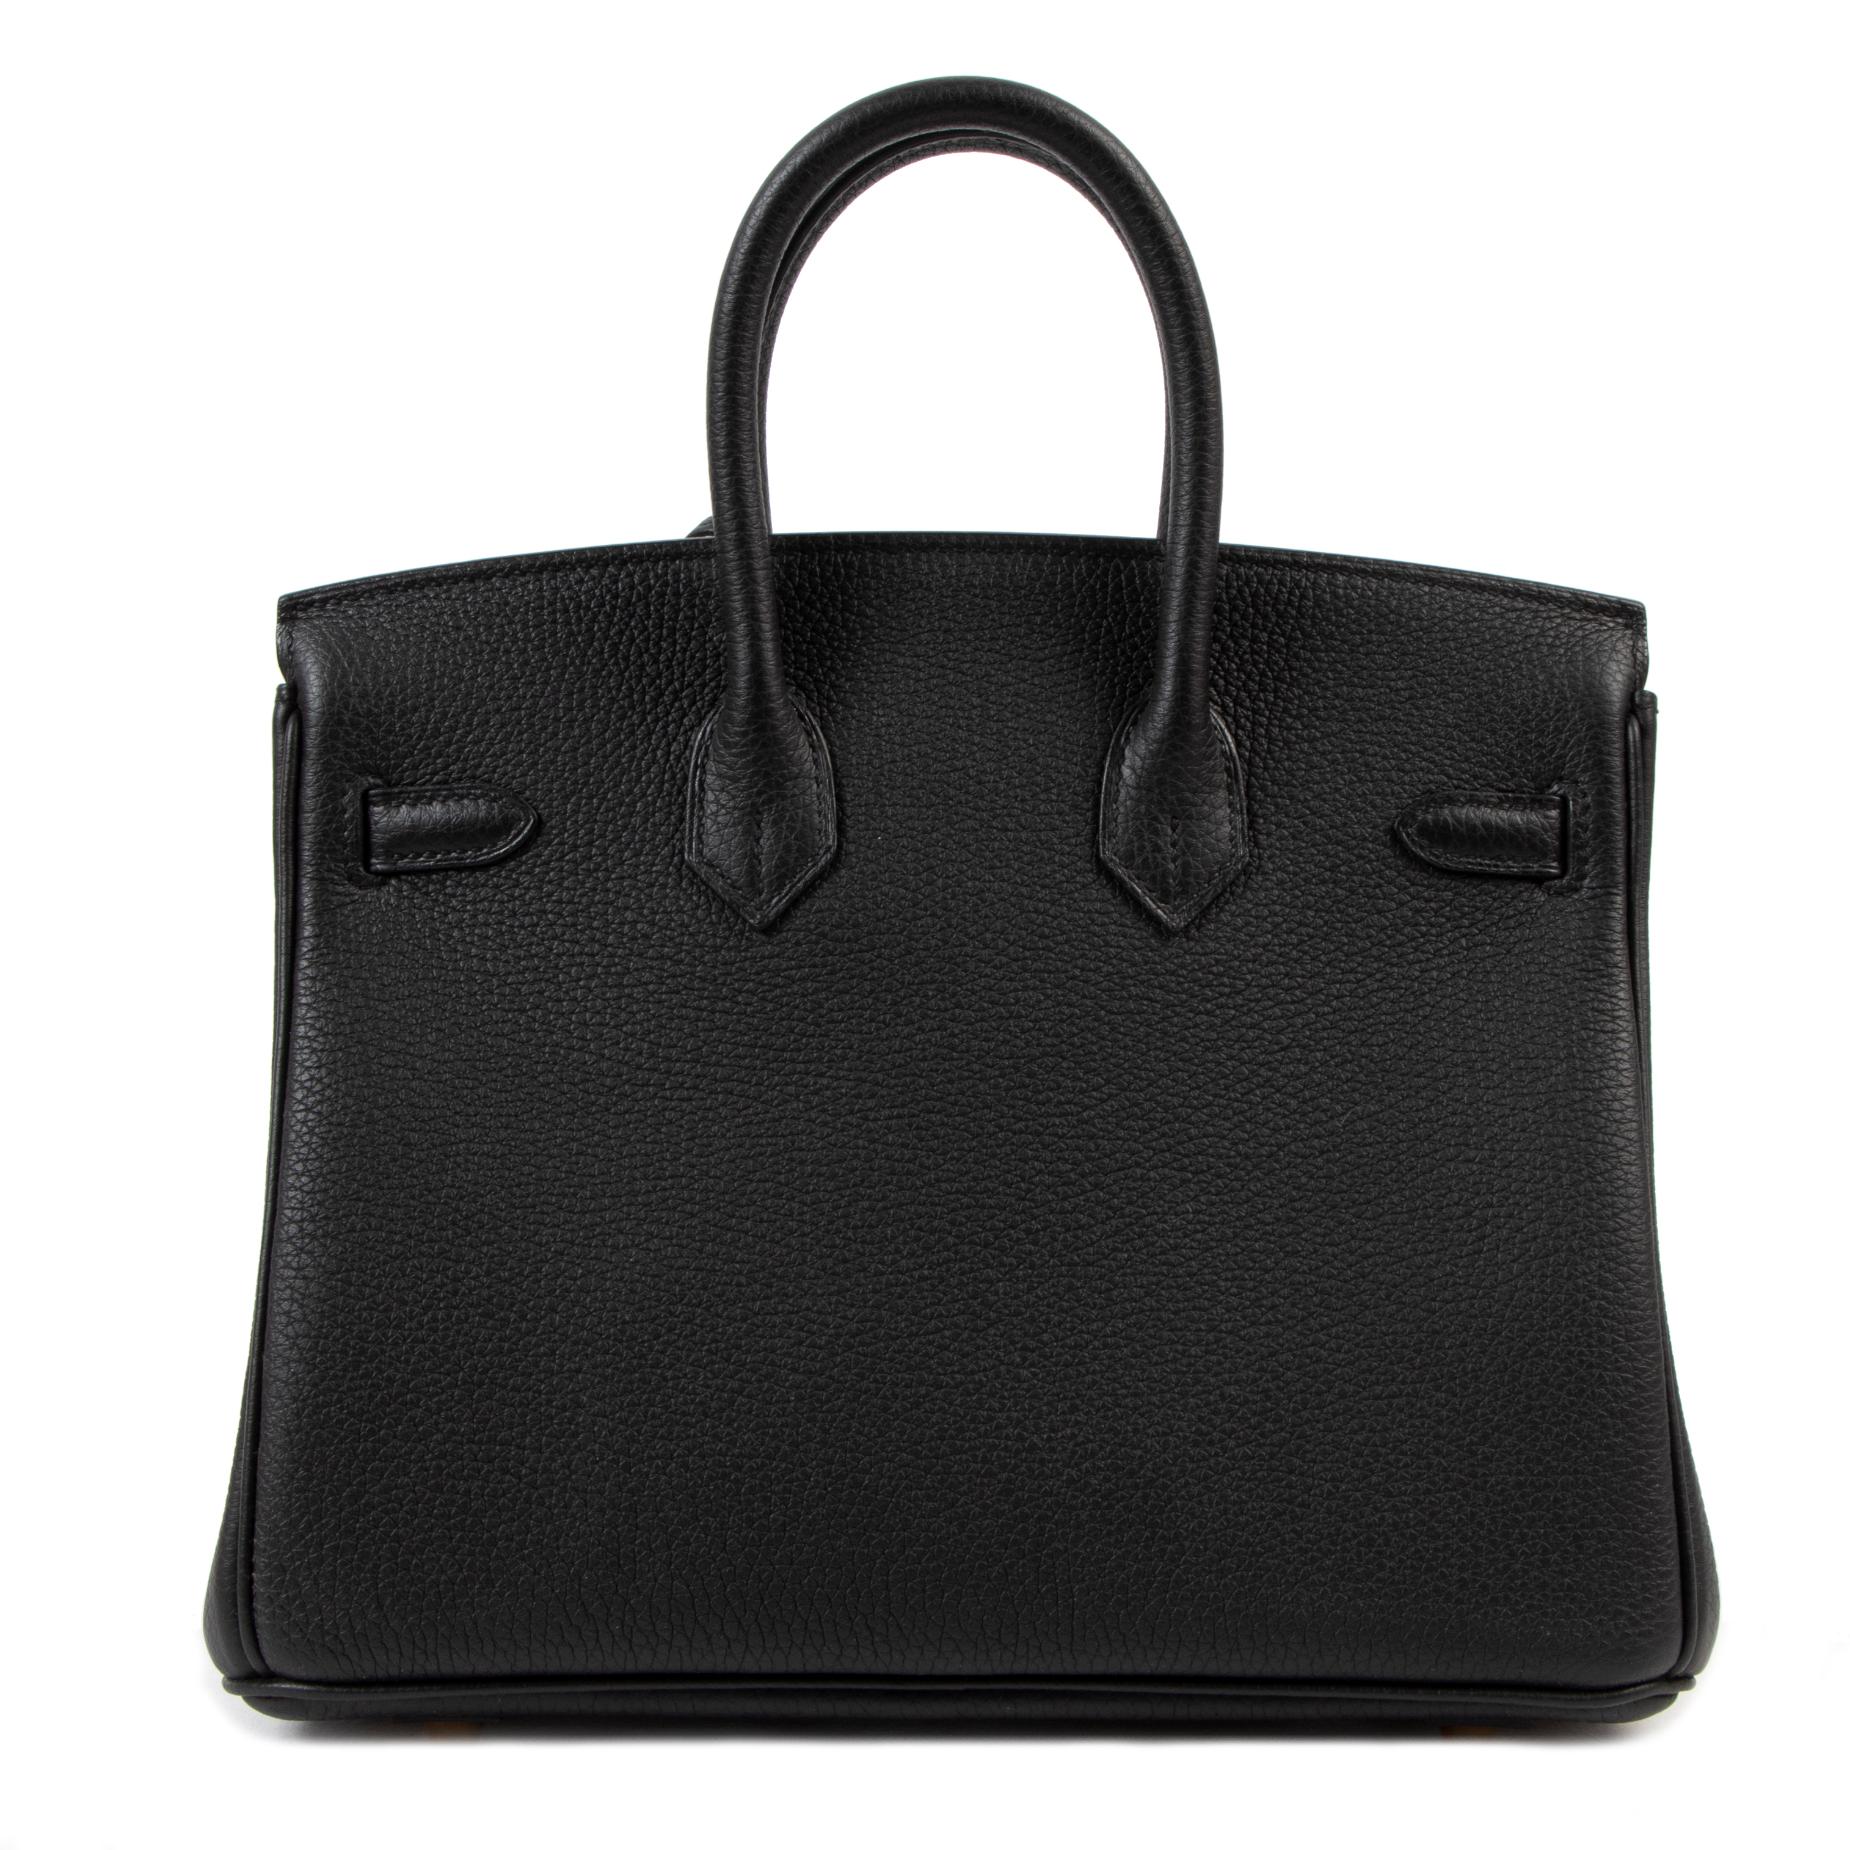 BRAND NEW

Never Used Hermes Birkin 25 Black Togo GHW

Skip the waiting list and get your hands on the most iconic bag of all time: the Hermès Birkin.
This Hermès Birkin in veau togo comes in timeless black,the perfect colour for all year round